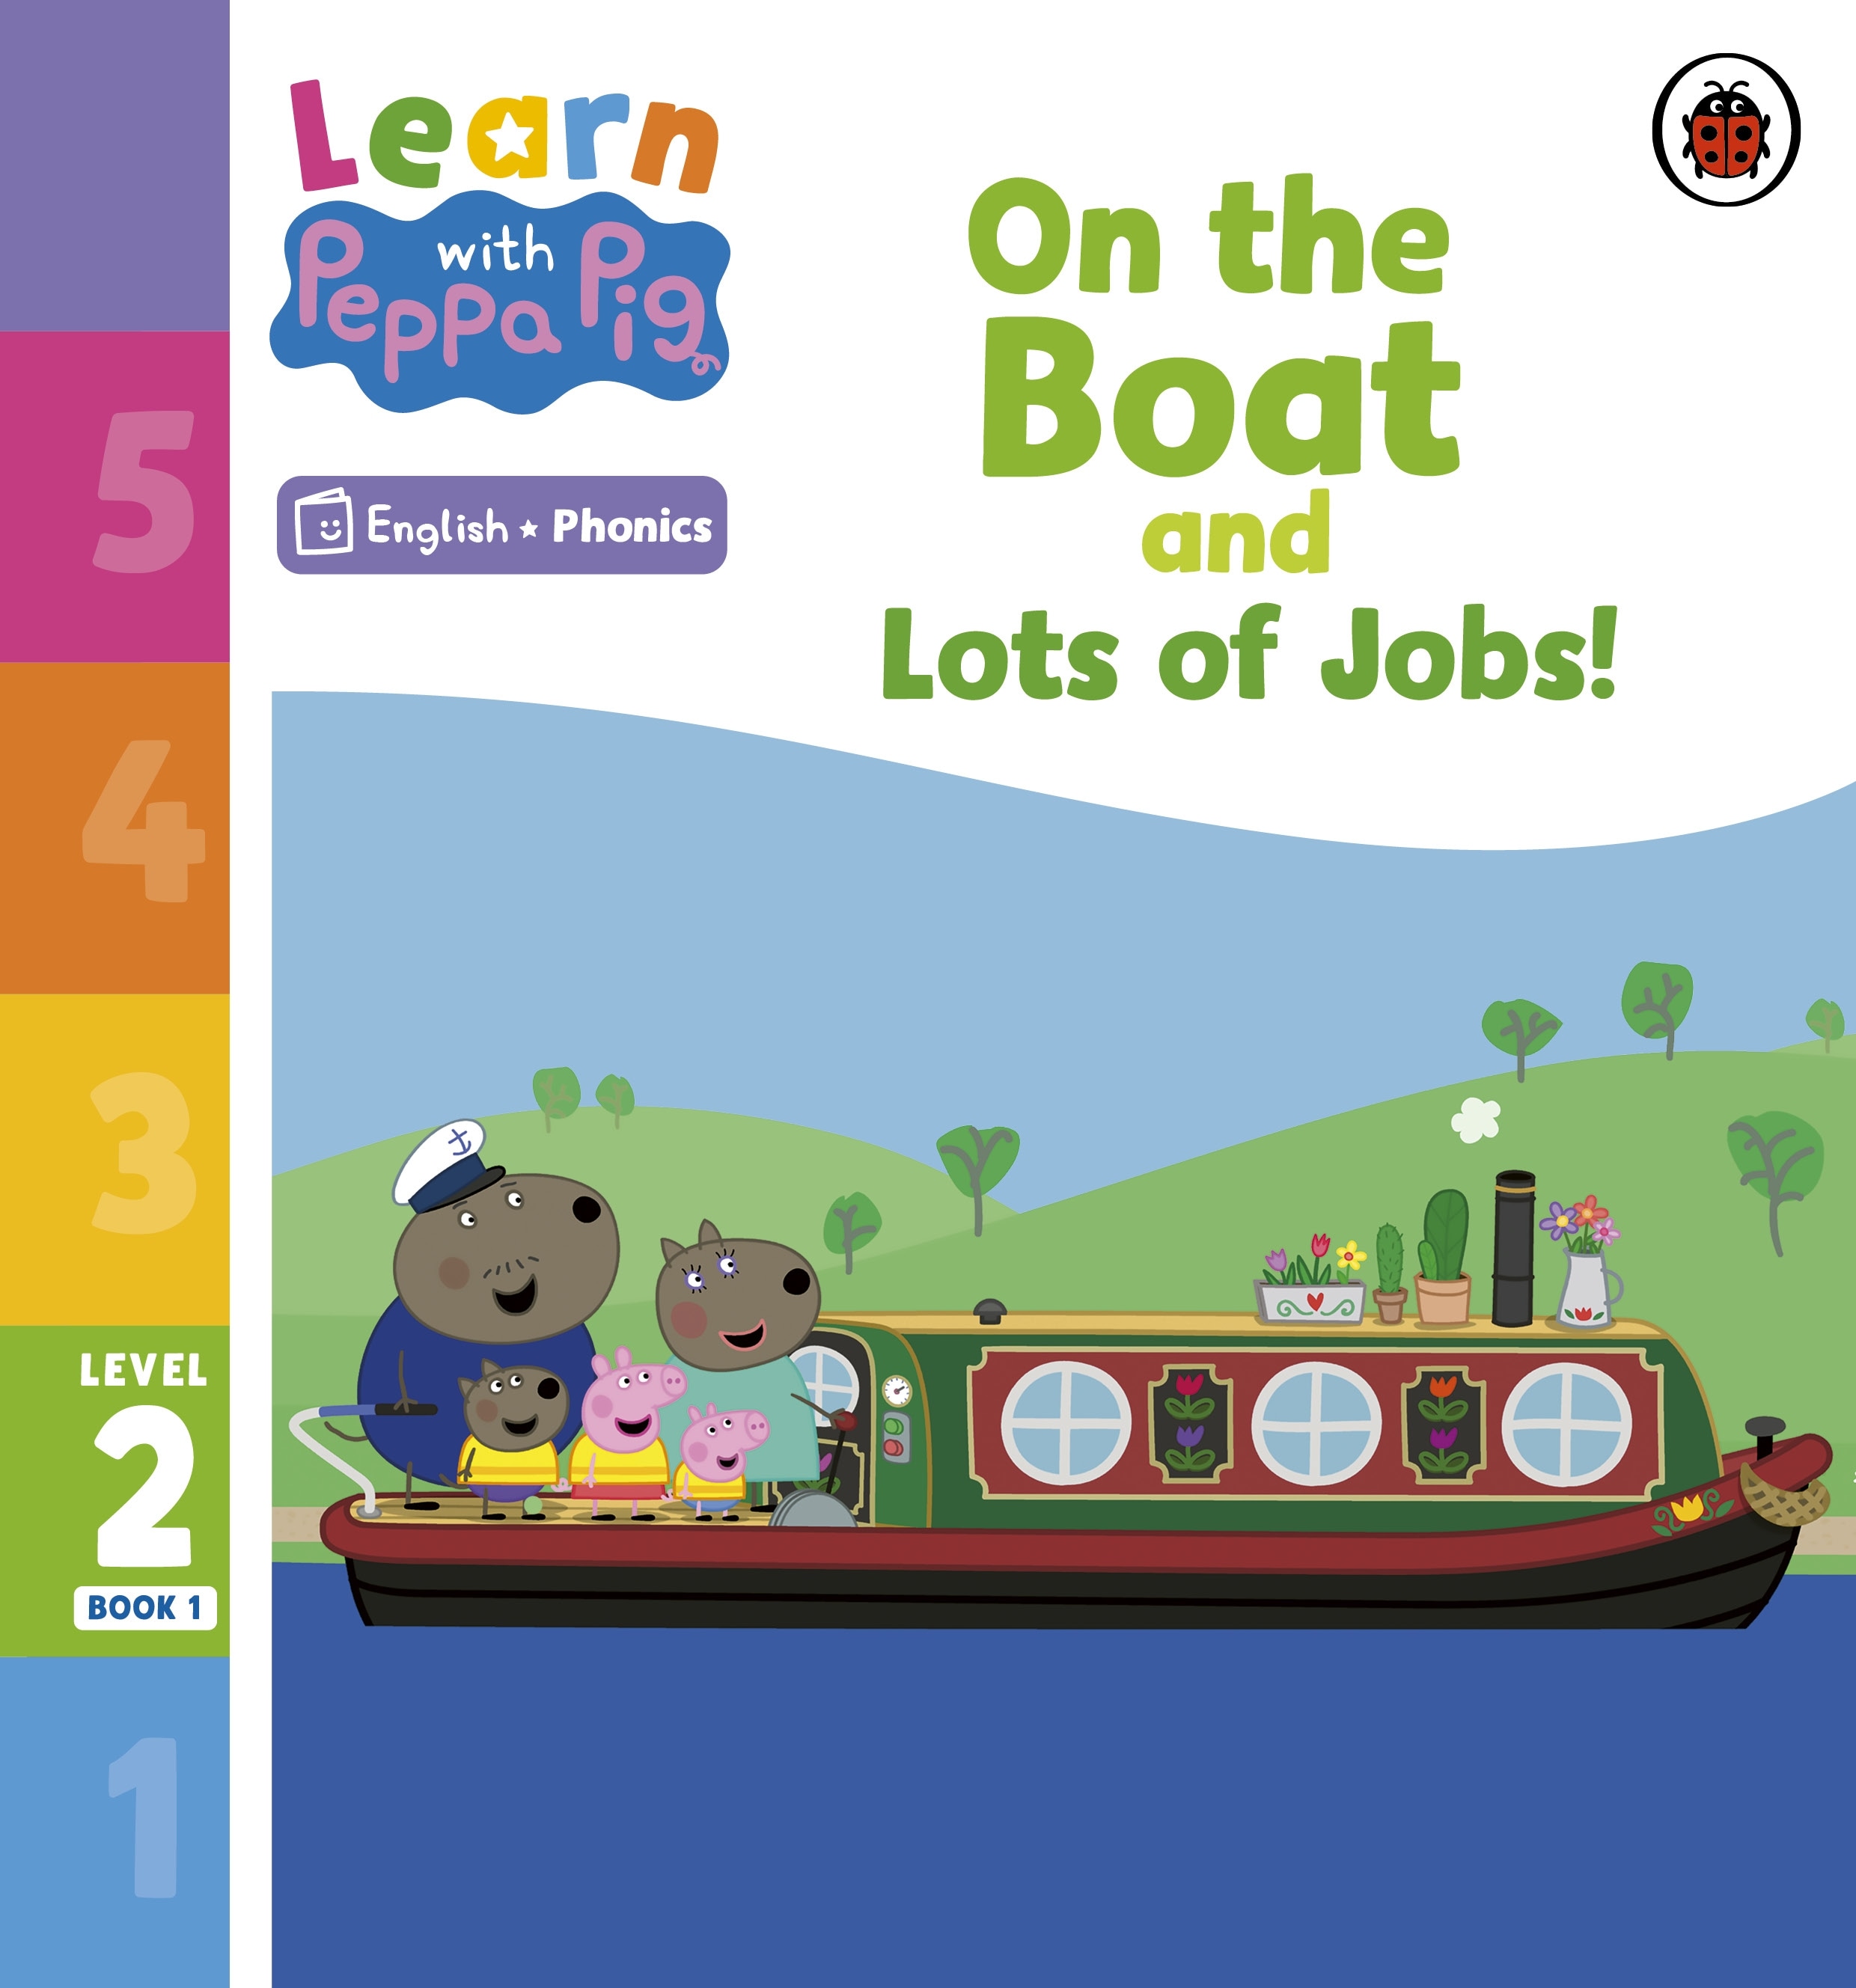 Book “Learn with Peppa Phonics Level 2 Book 1 — On the Boat and Lots of Jobs! (Phonics Reader)” by Peppa Pig — January 5, 2023